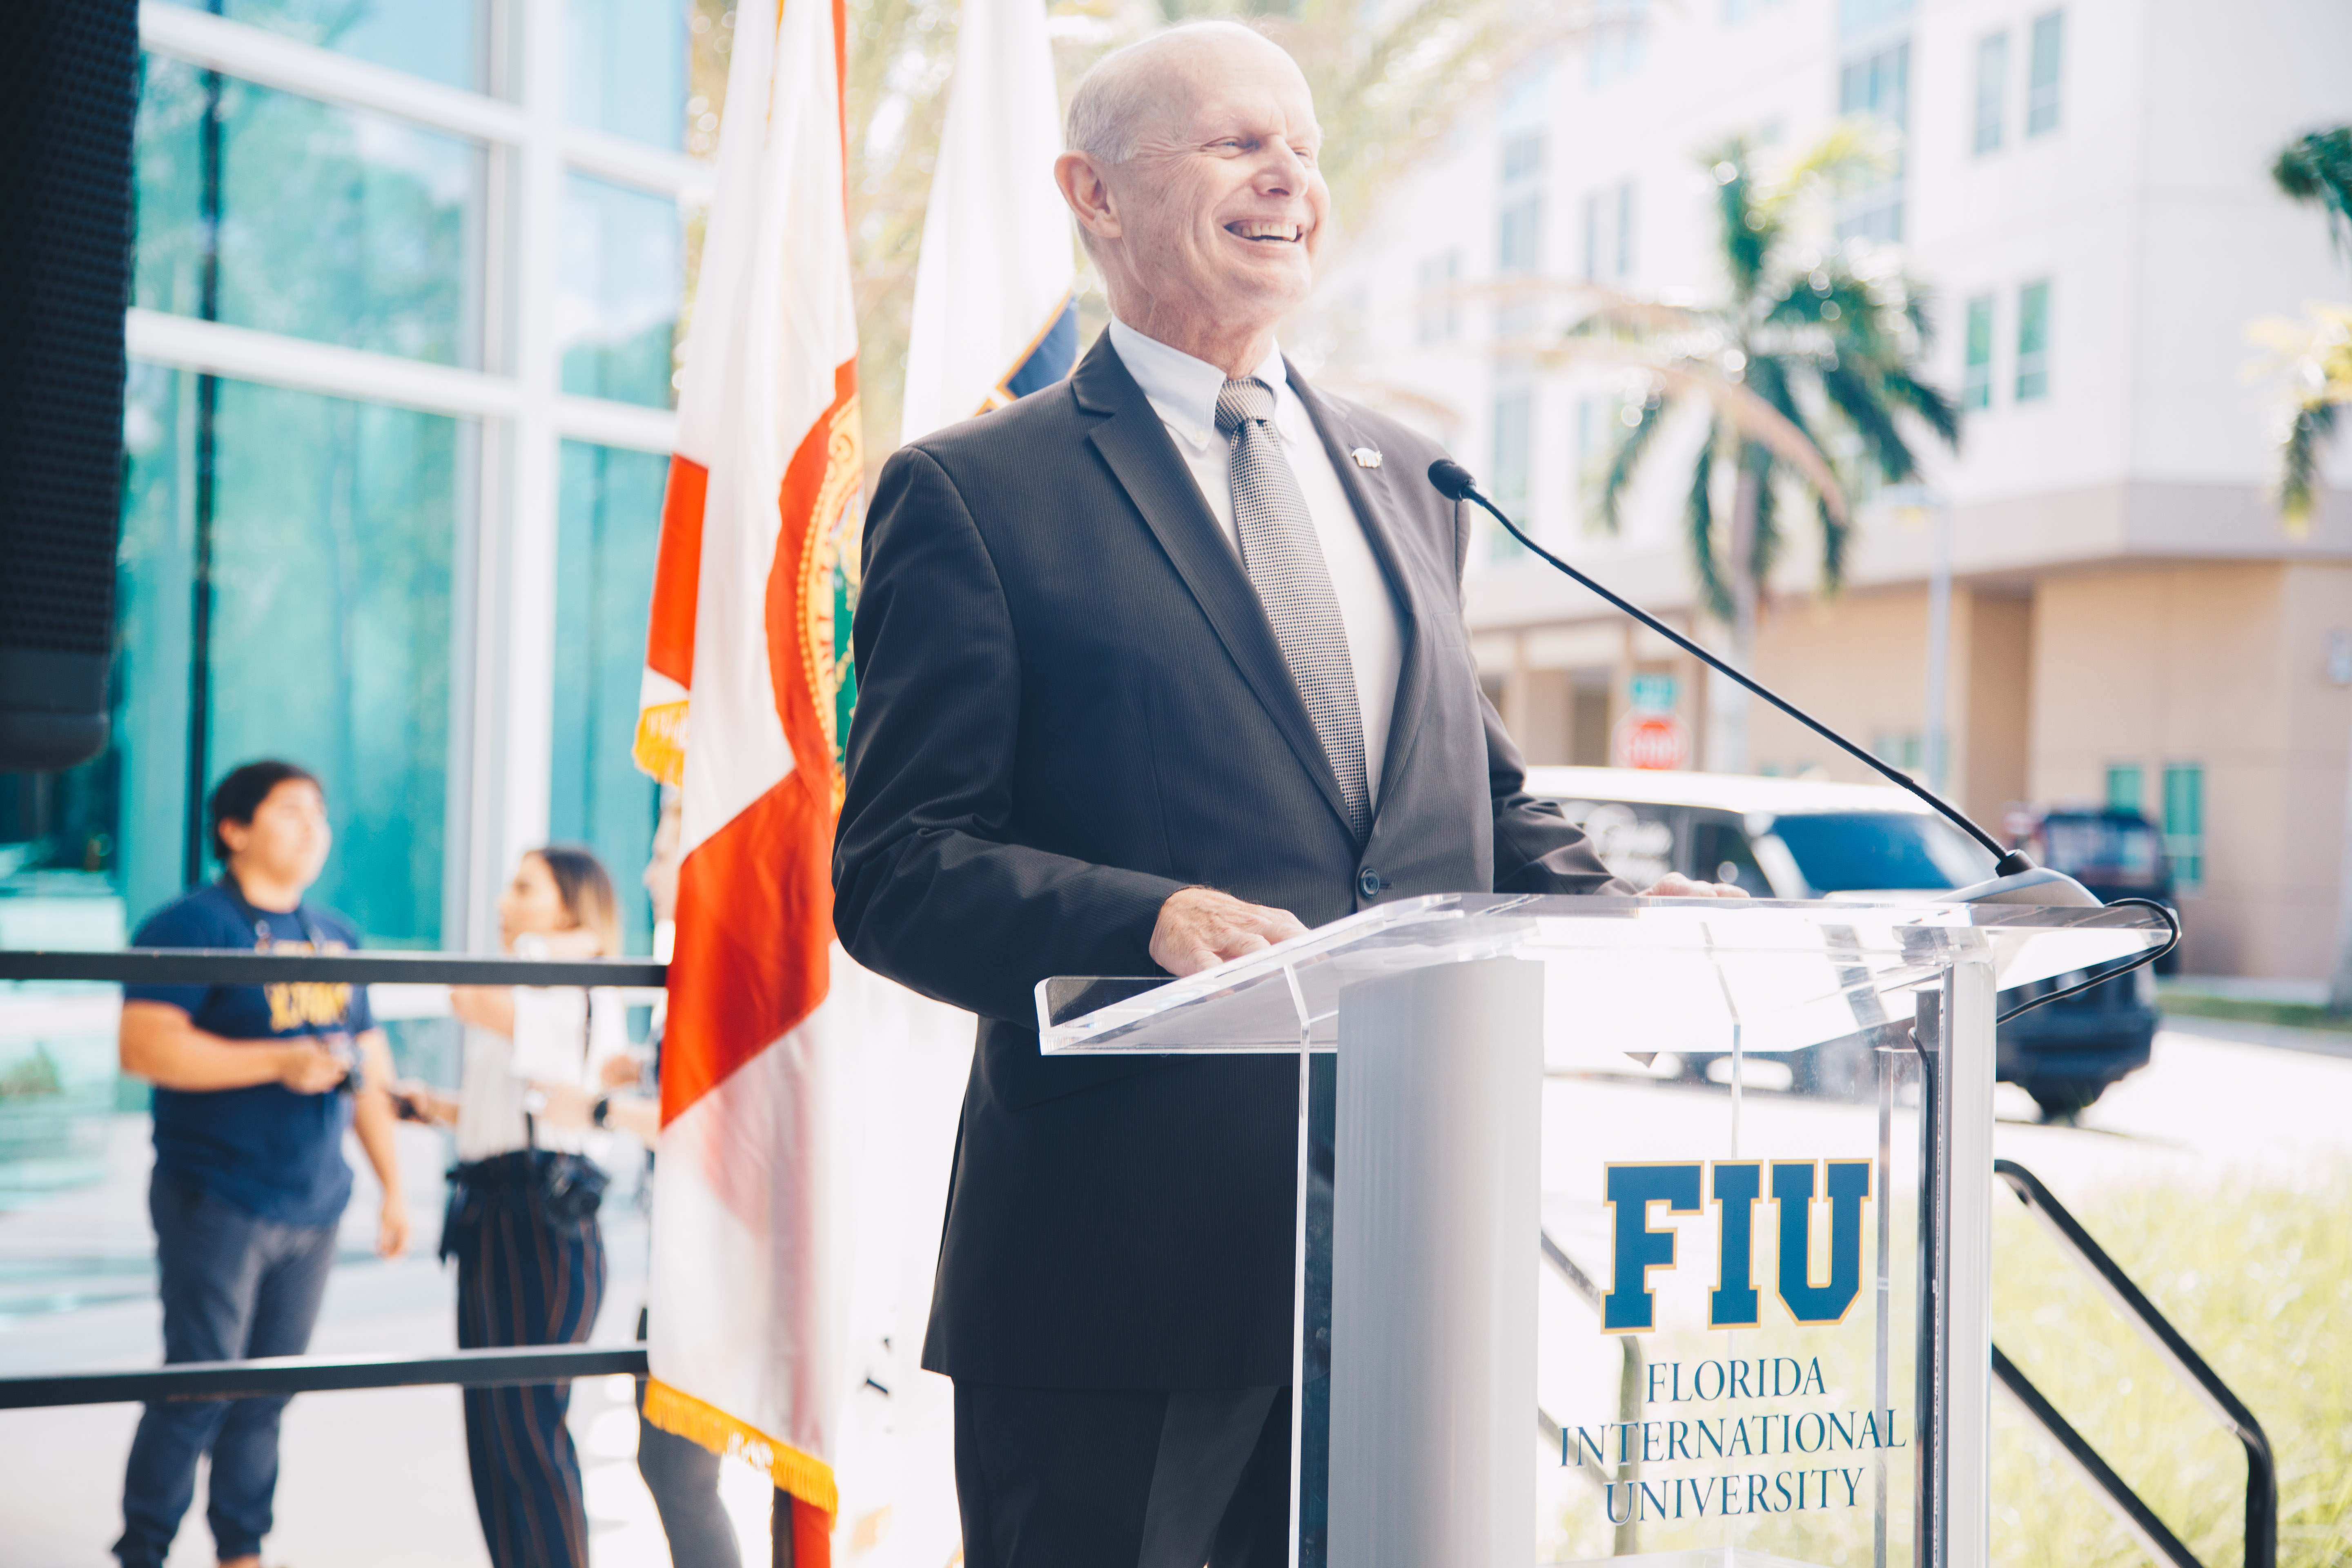 Dr. Lunsford delivering a speech outside of the FIU Wellness and Recreation Center